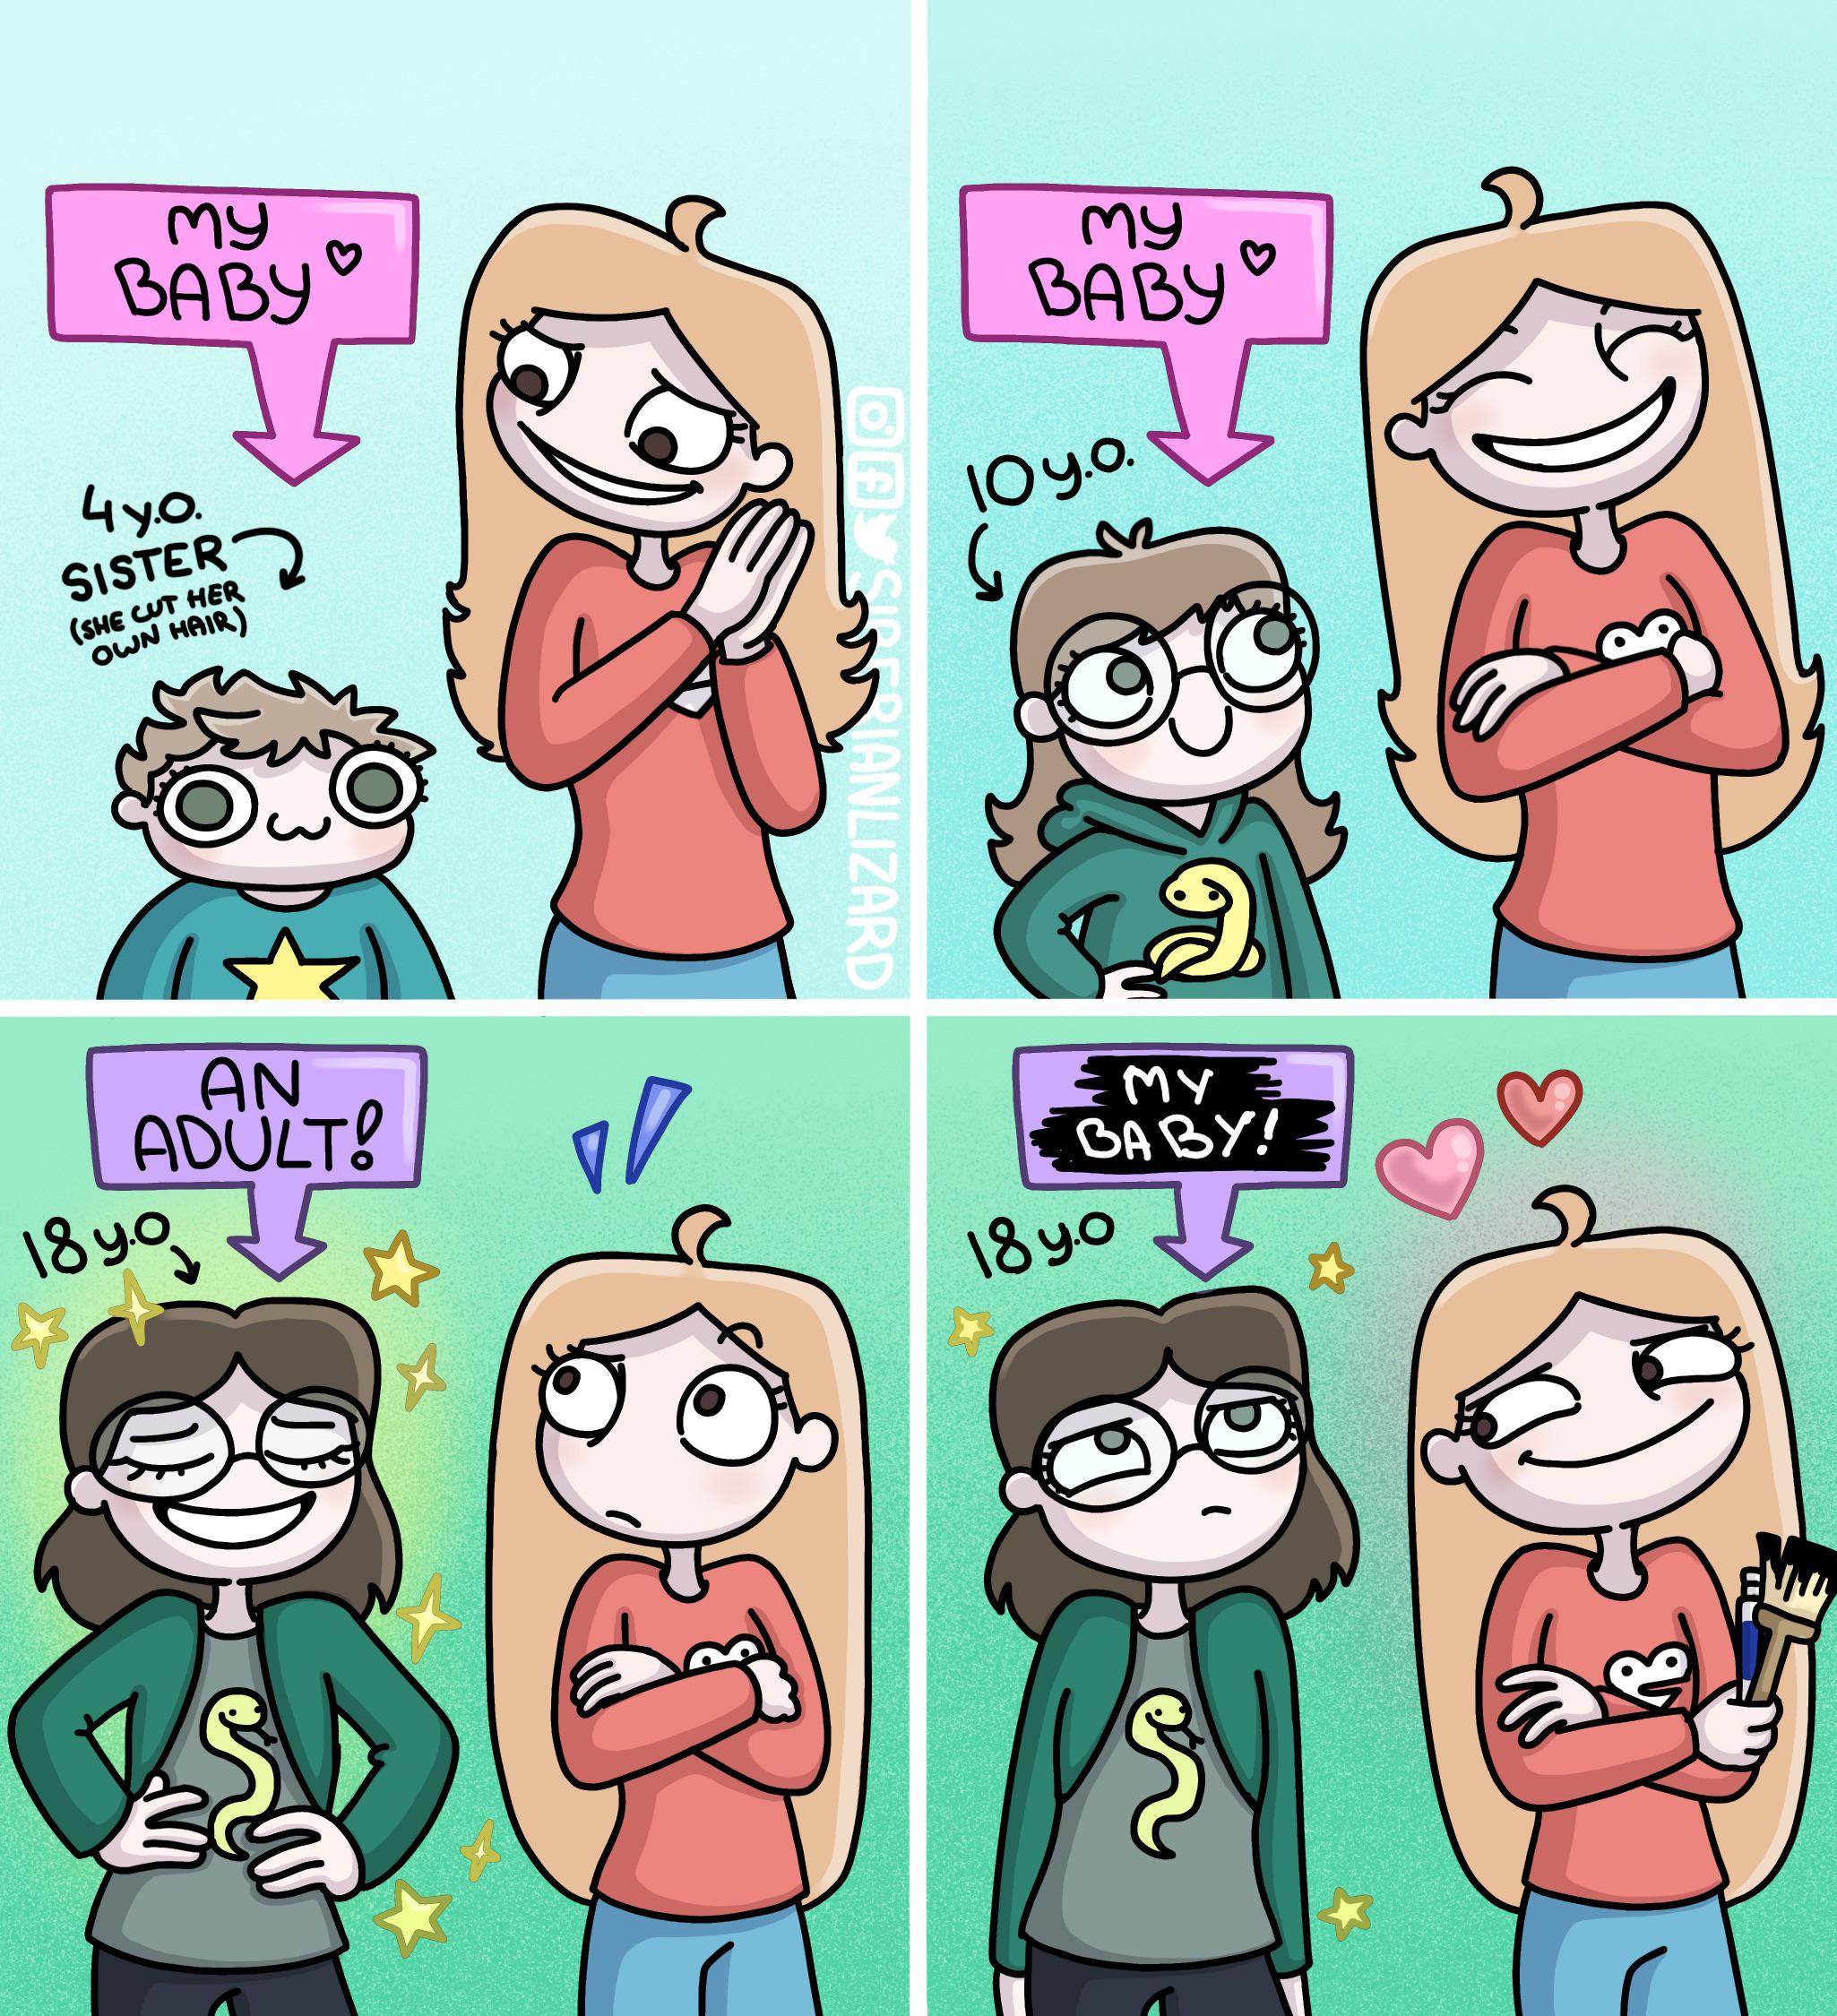 Wholesome memes, Slytherin, Baby, BPD Wholesome Memes Wholesome memes, Slytherin, Baby, BPD text: Ö NLIZARD 